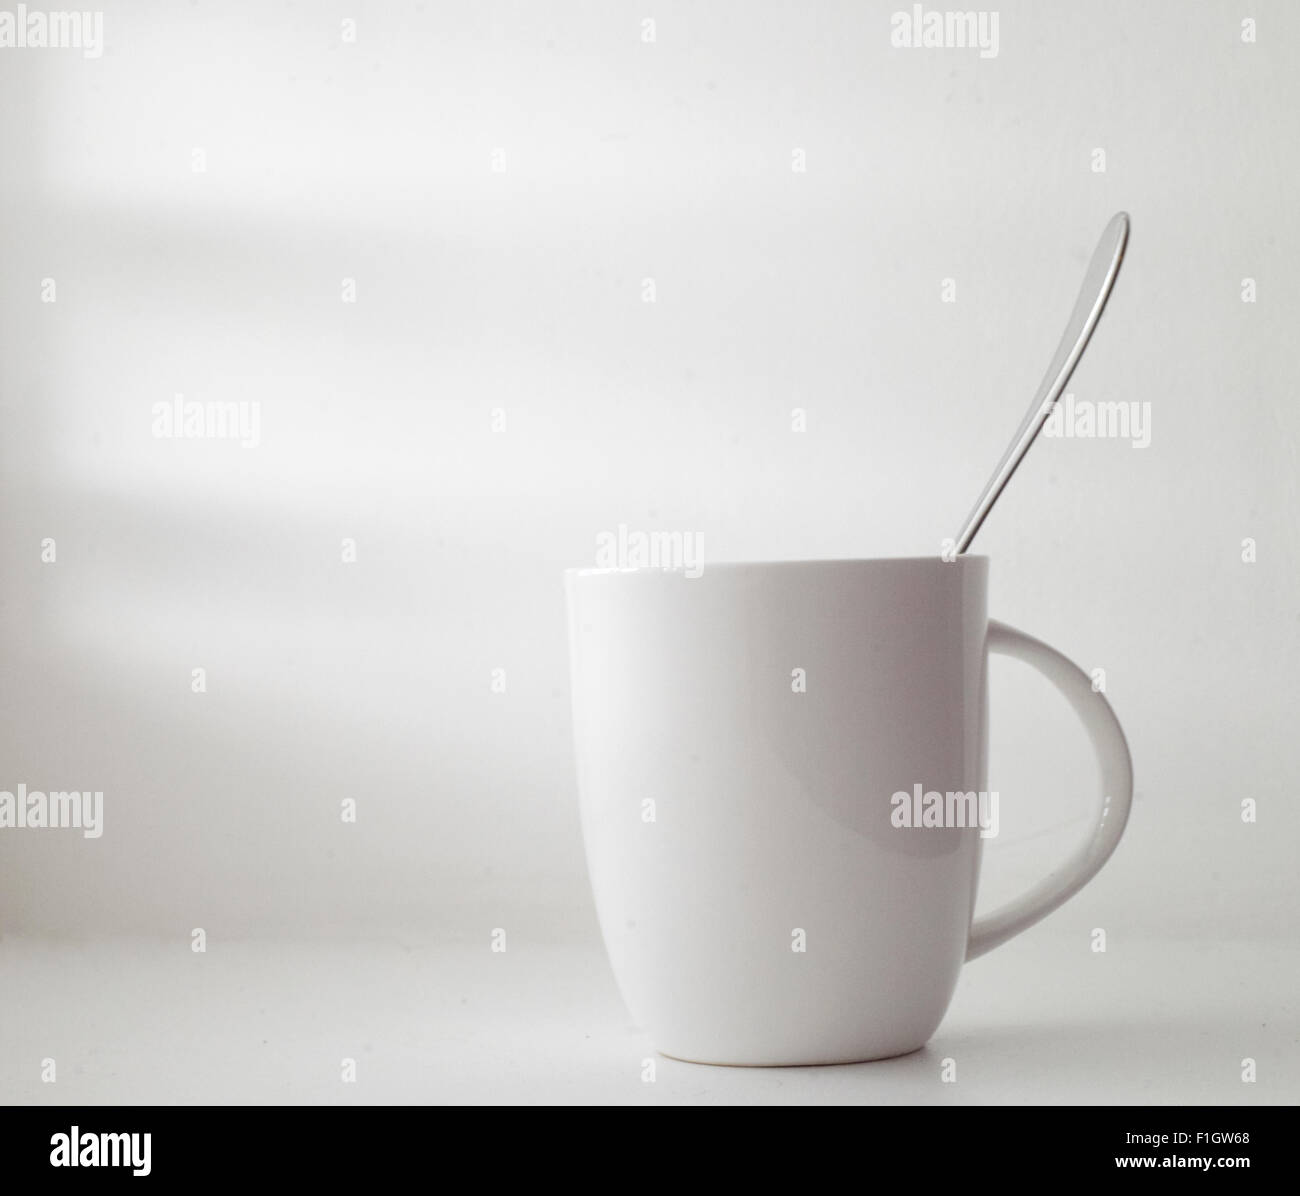 A white drinks mug with a silver spoon in it. Taken against a white wall. Stock Photo